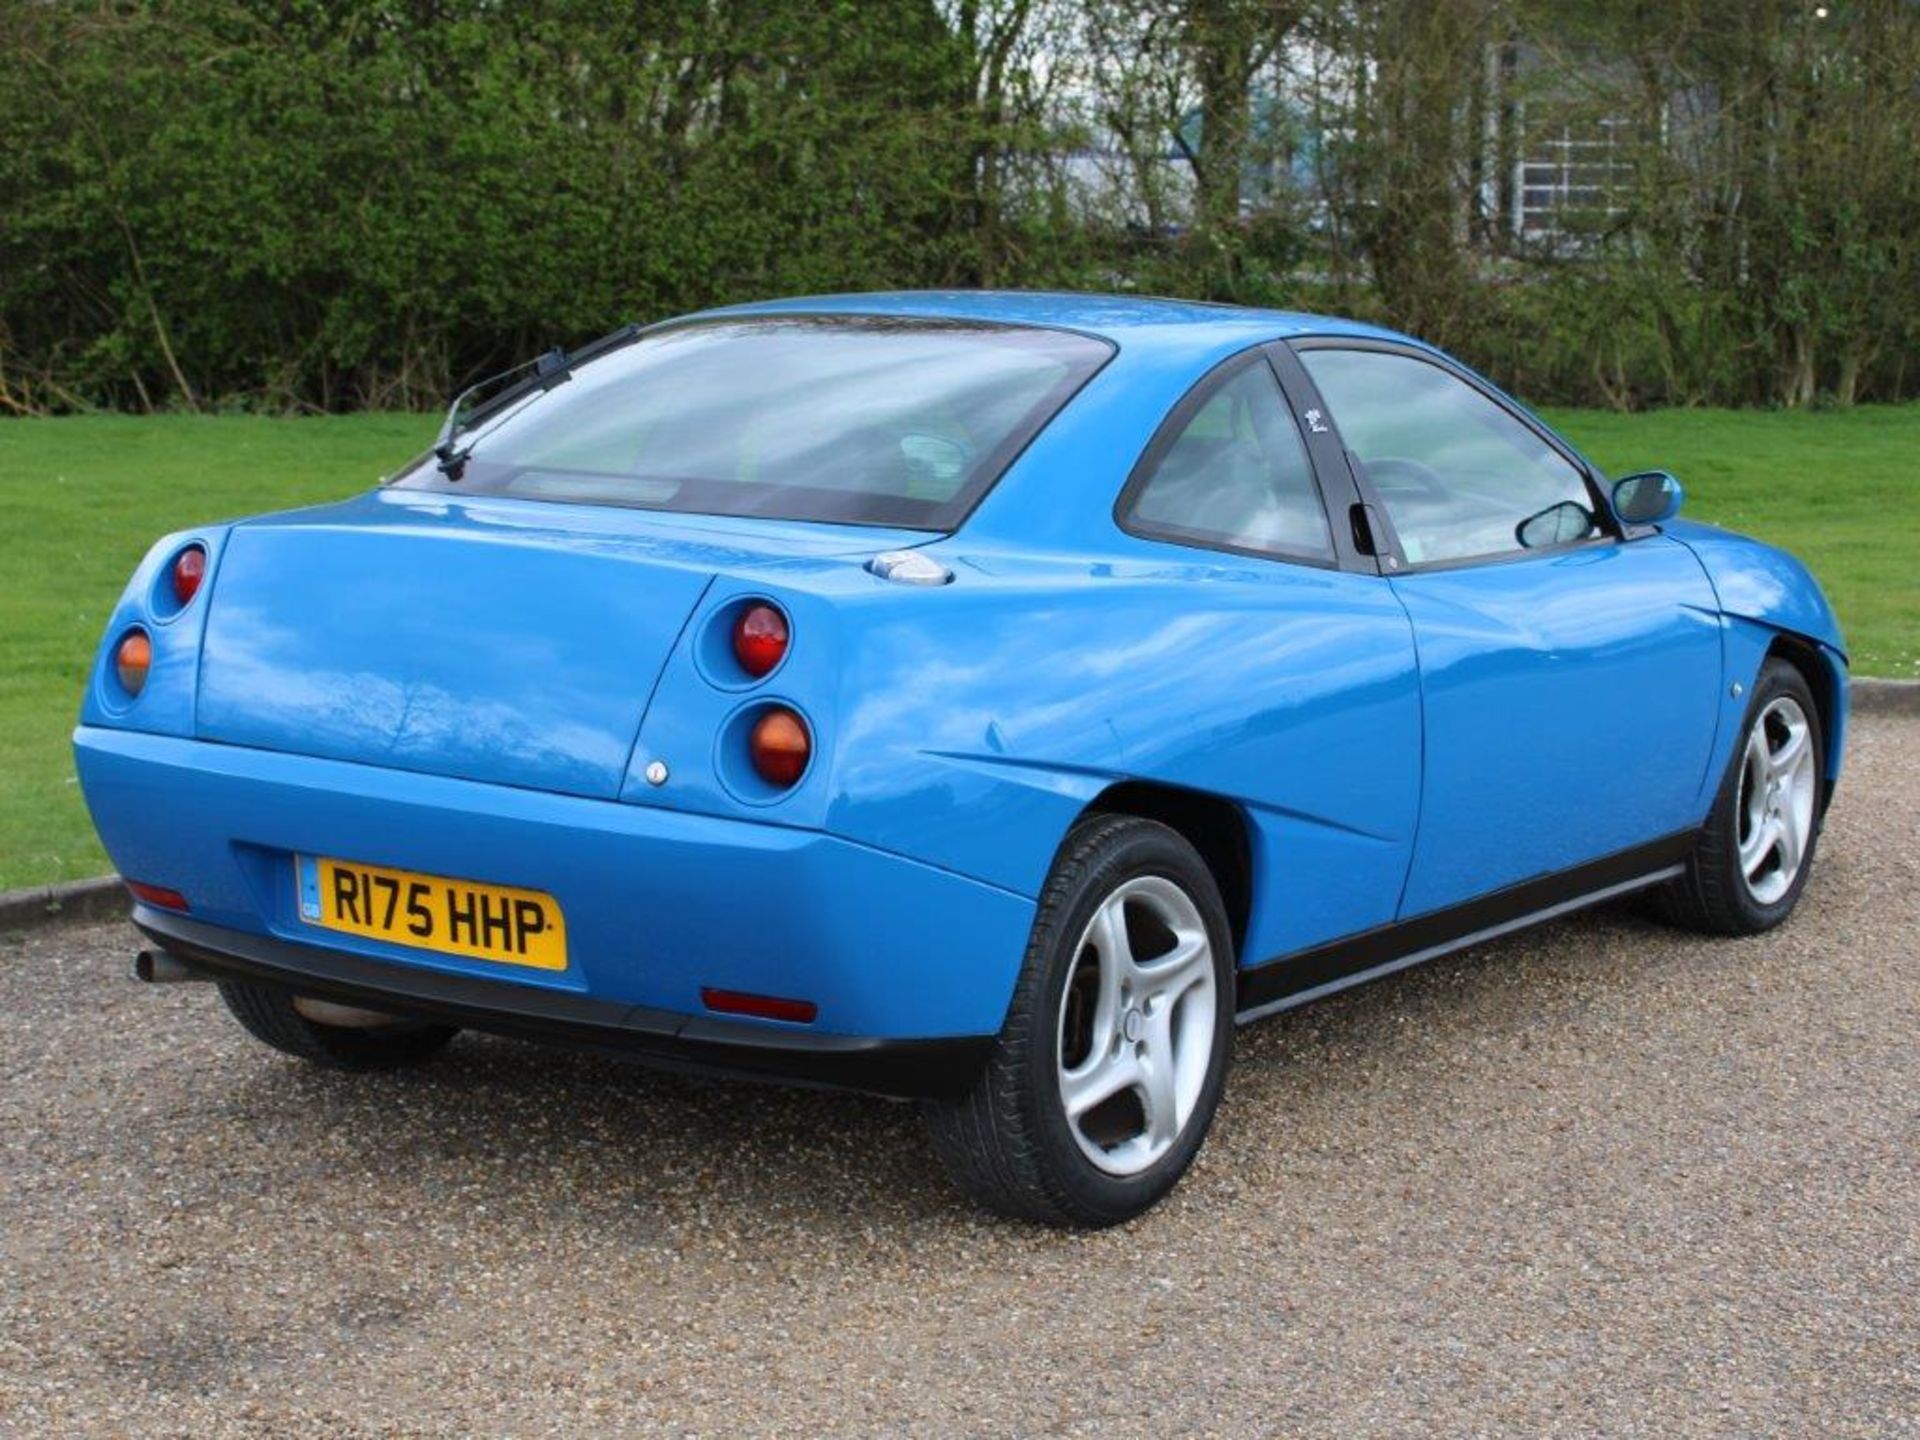 1997 Fiat Coupe 20V Turbo - Image 4 of 13